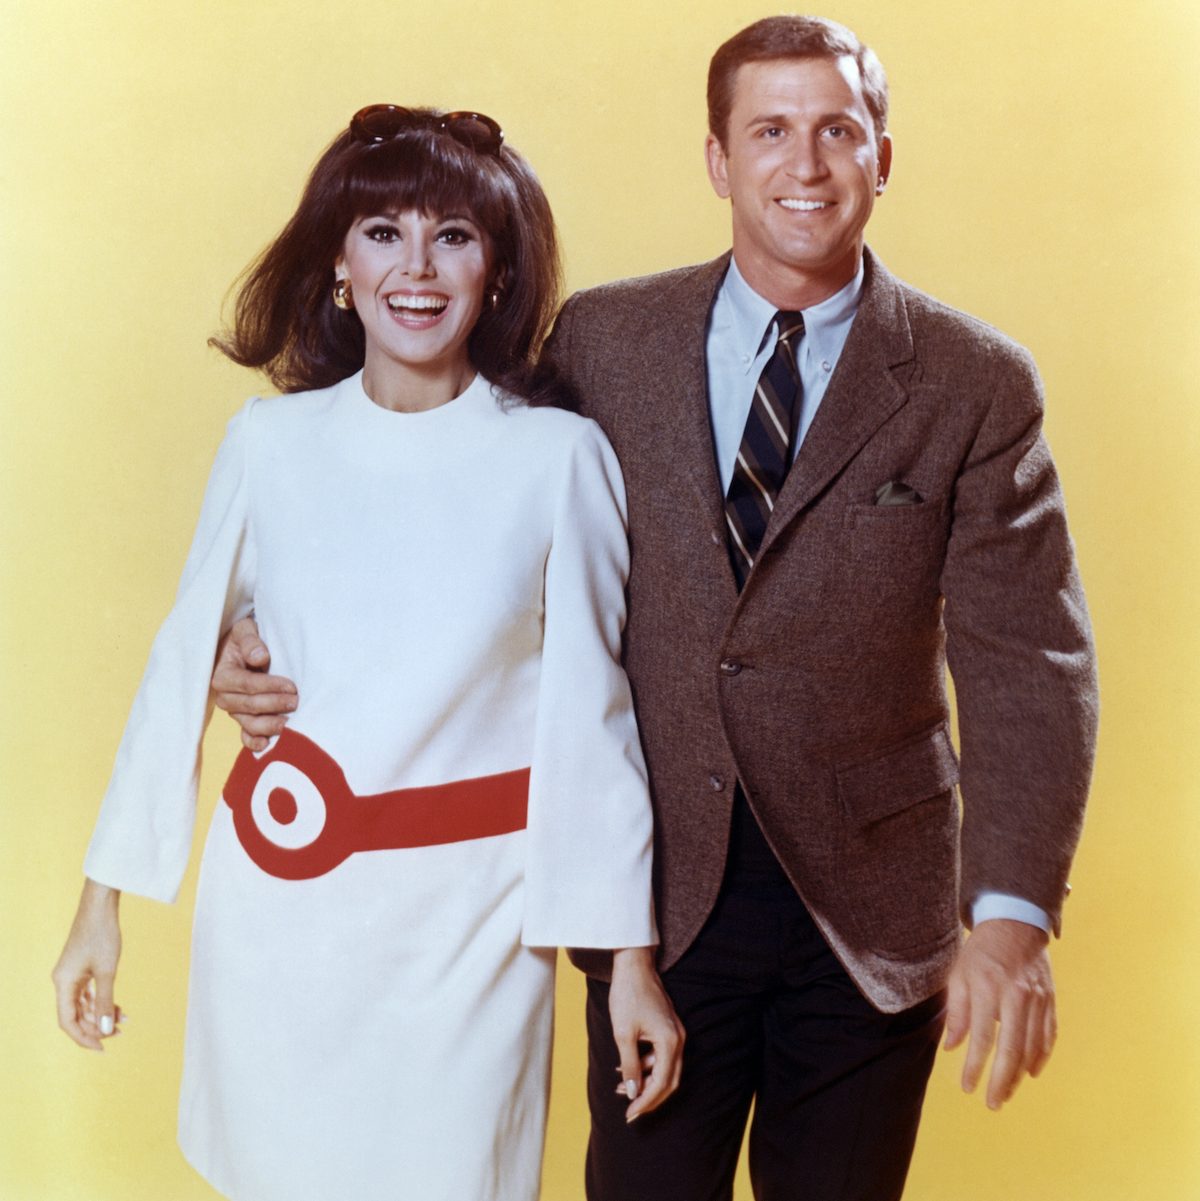 Promo shoot for That Girl with Marlo Thomas and Ted Bessell, 1967